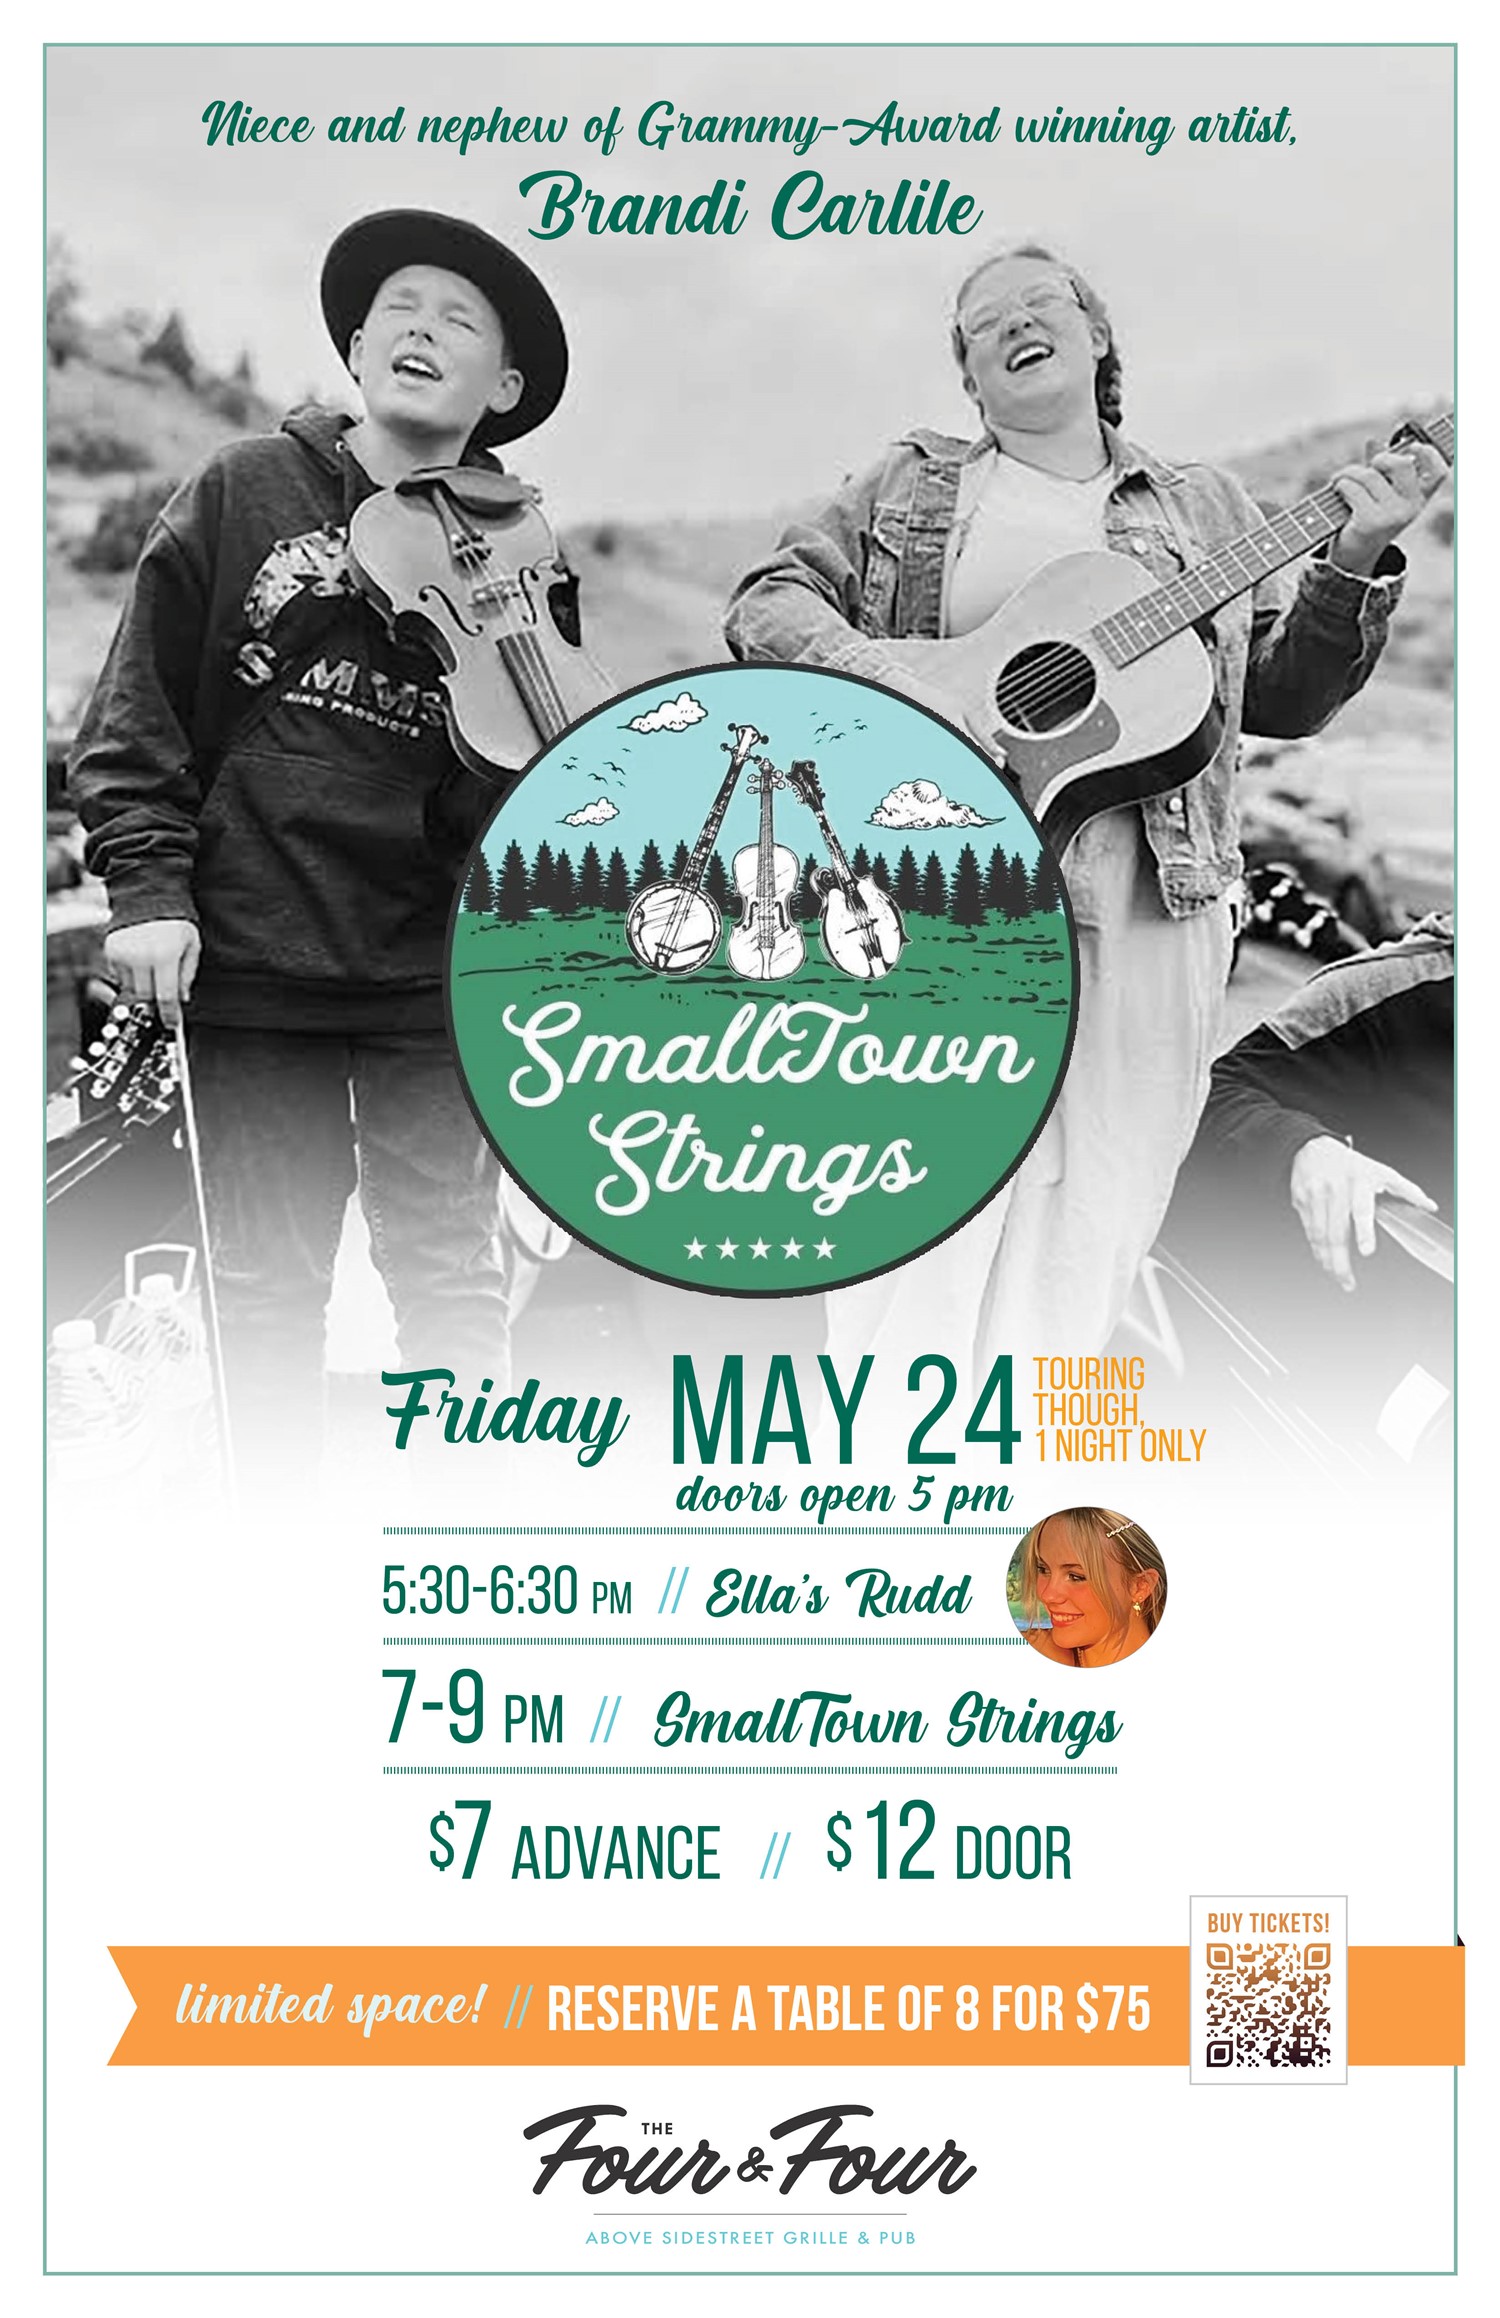 SmallTown Strings  on may. 24, 17:30@The Four and Four, above Sidestreet Grille & Bar - Compra entradas y obtén información enSidestreet Live / Four and Four 